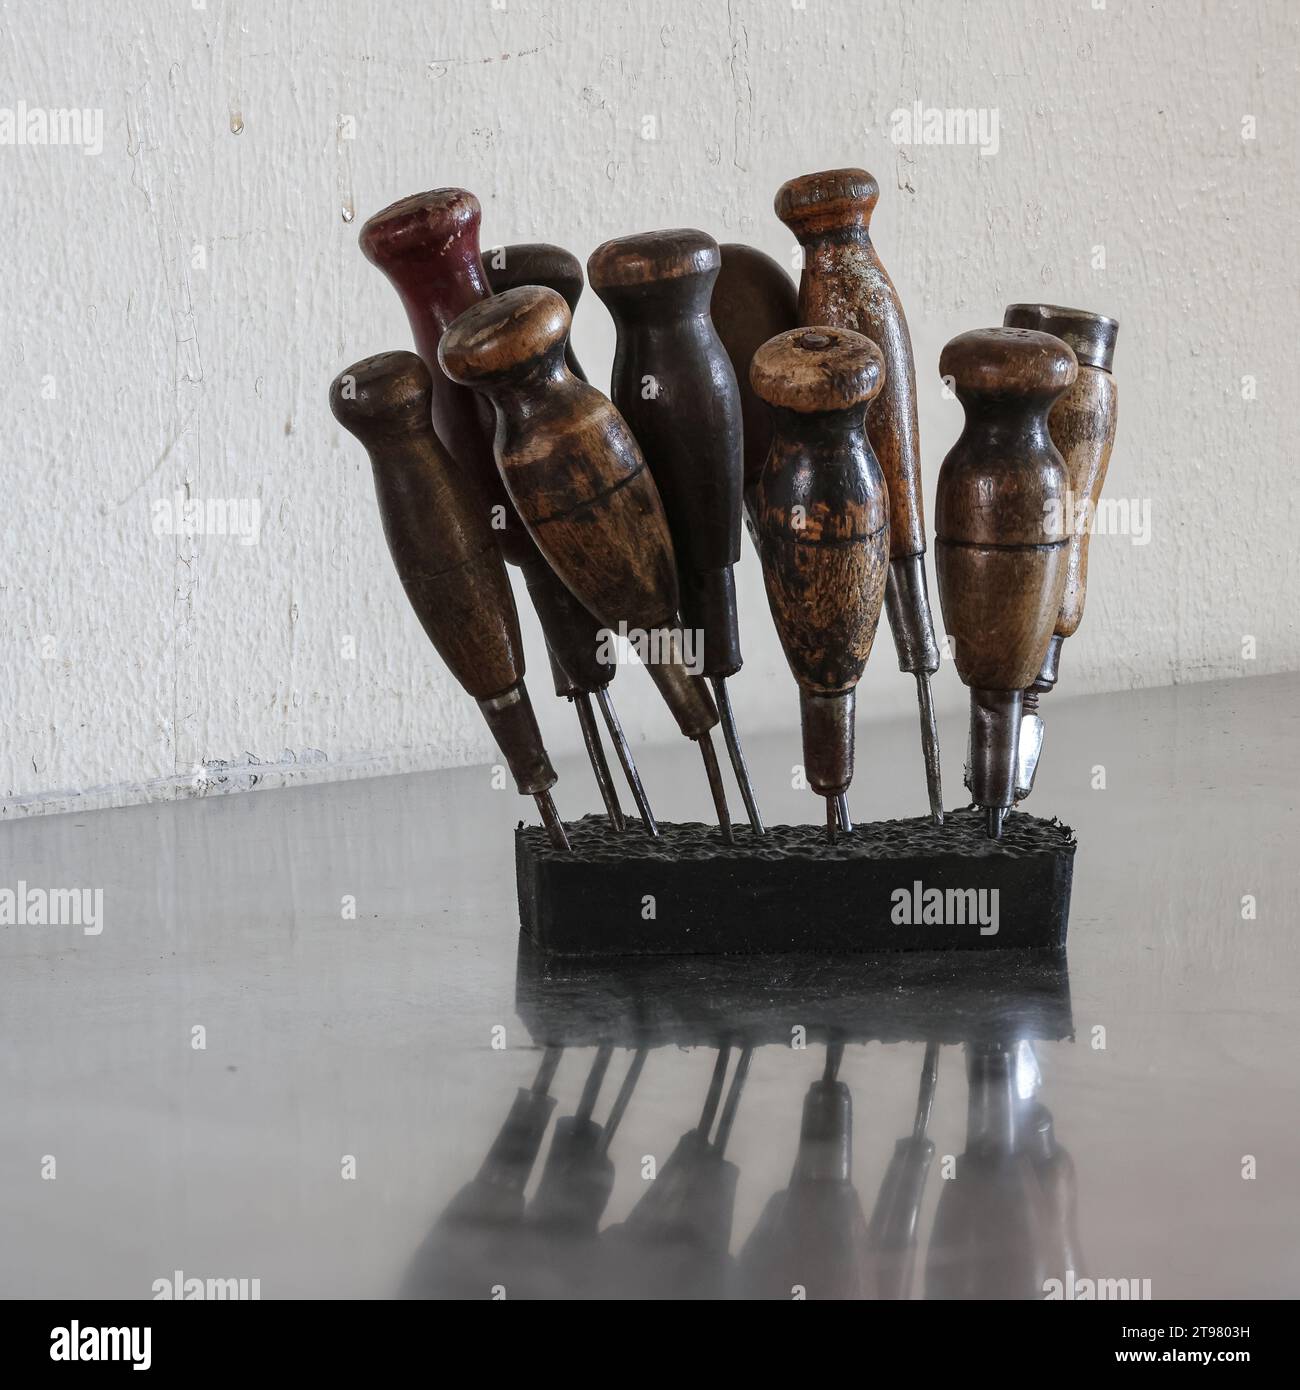 The old awls each have a decorated wooden handle and are tools for shoemakers. Stock Photo